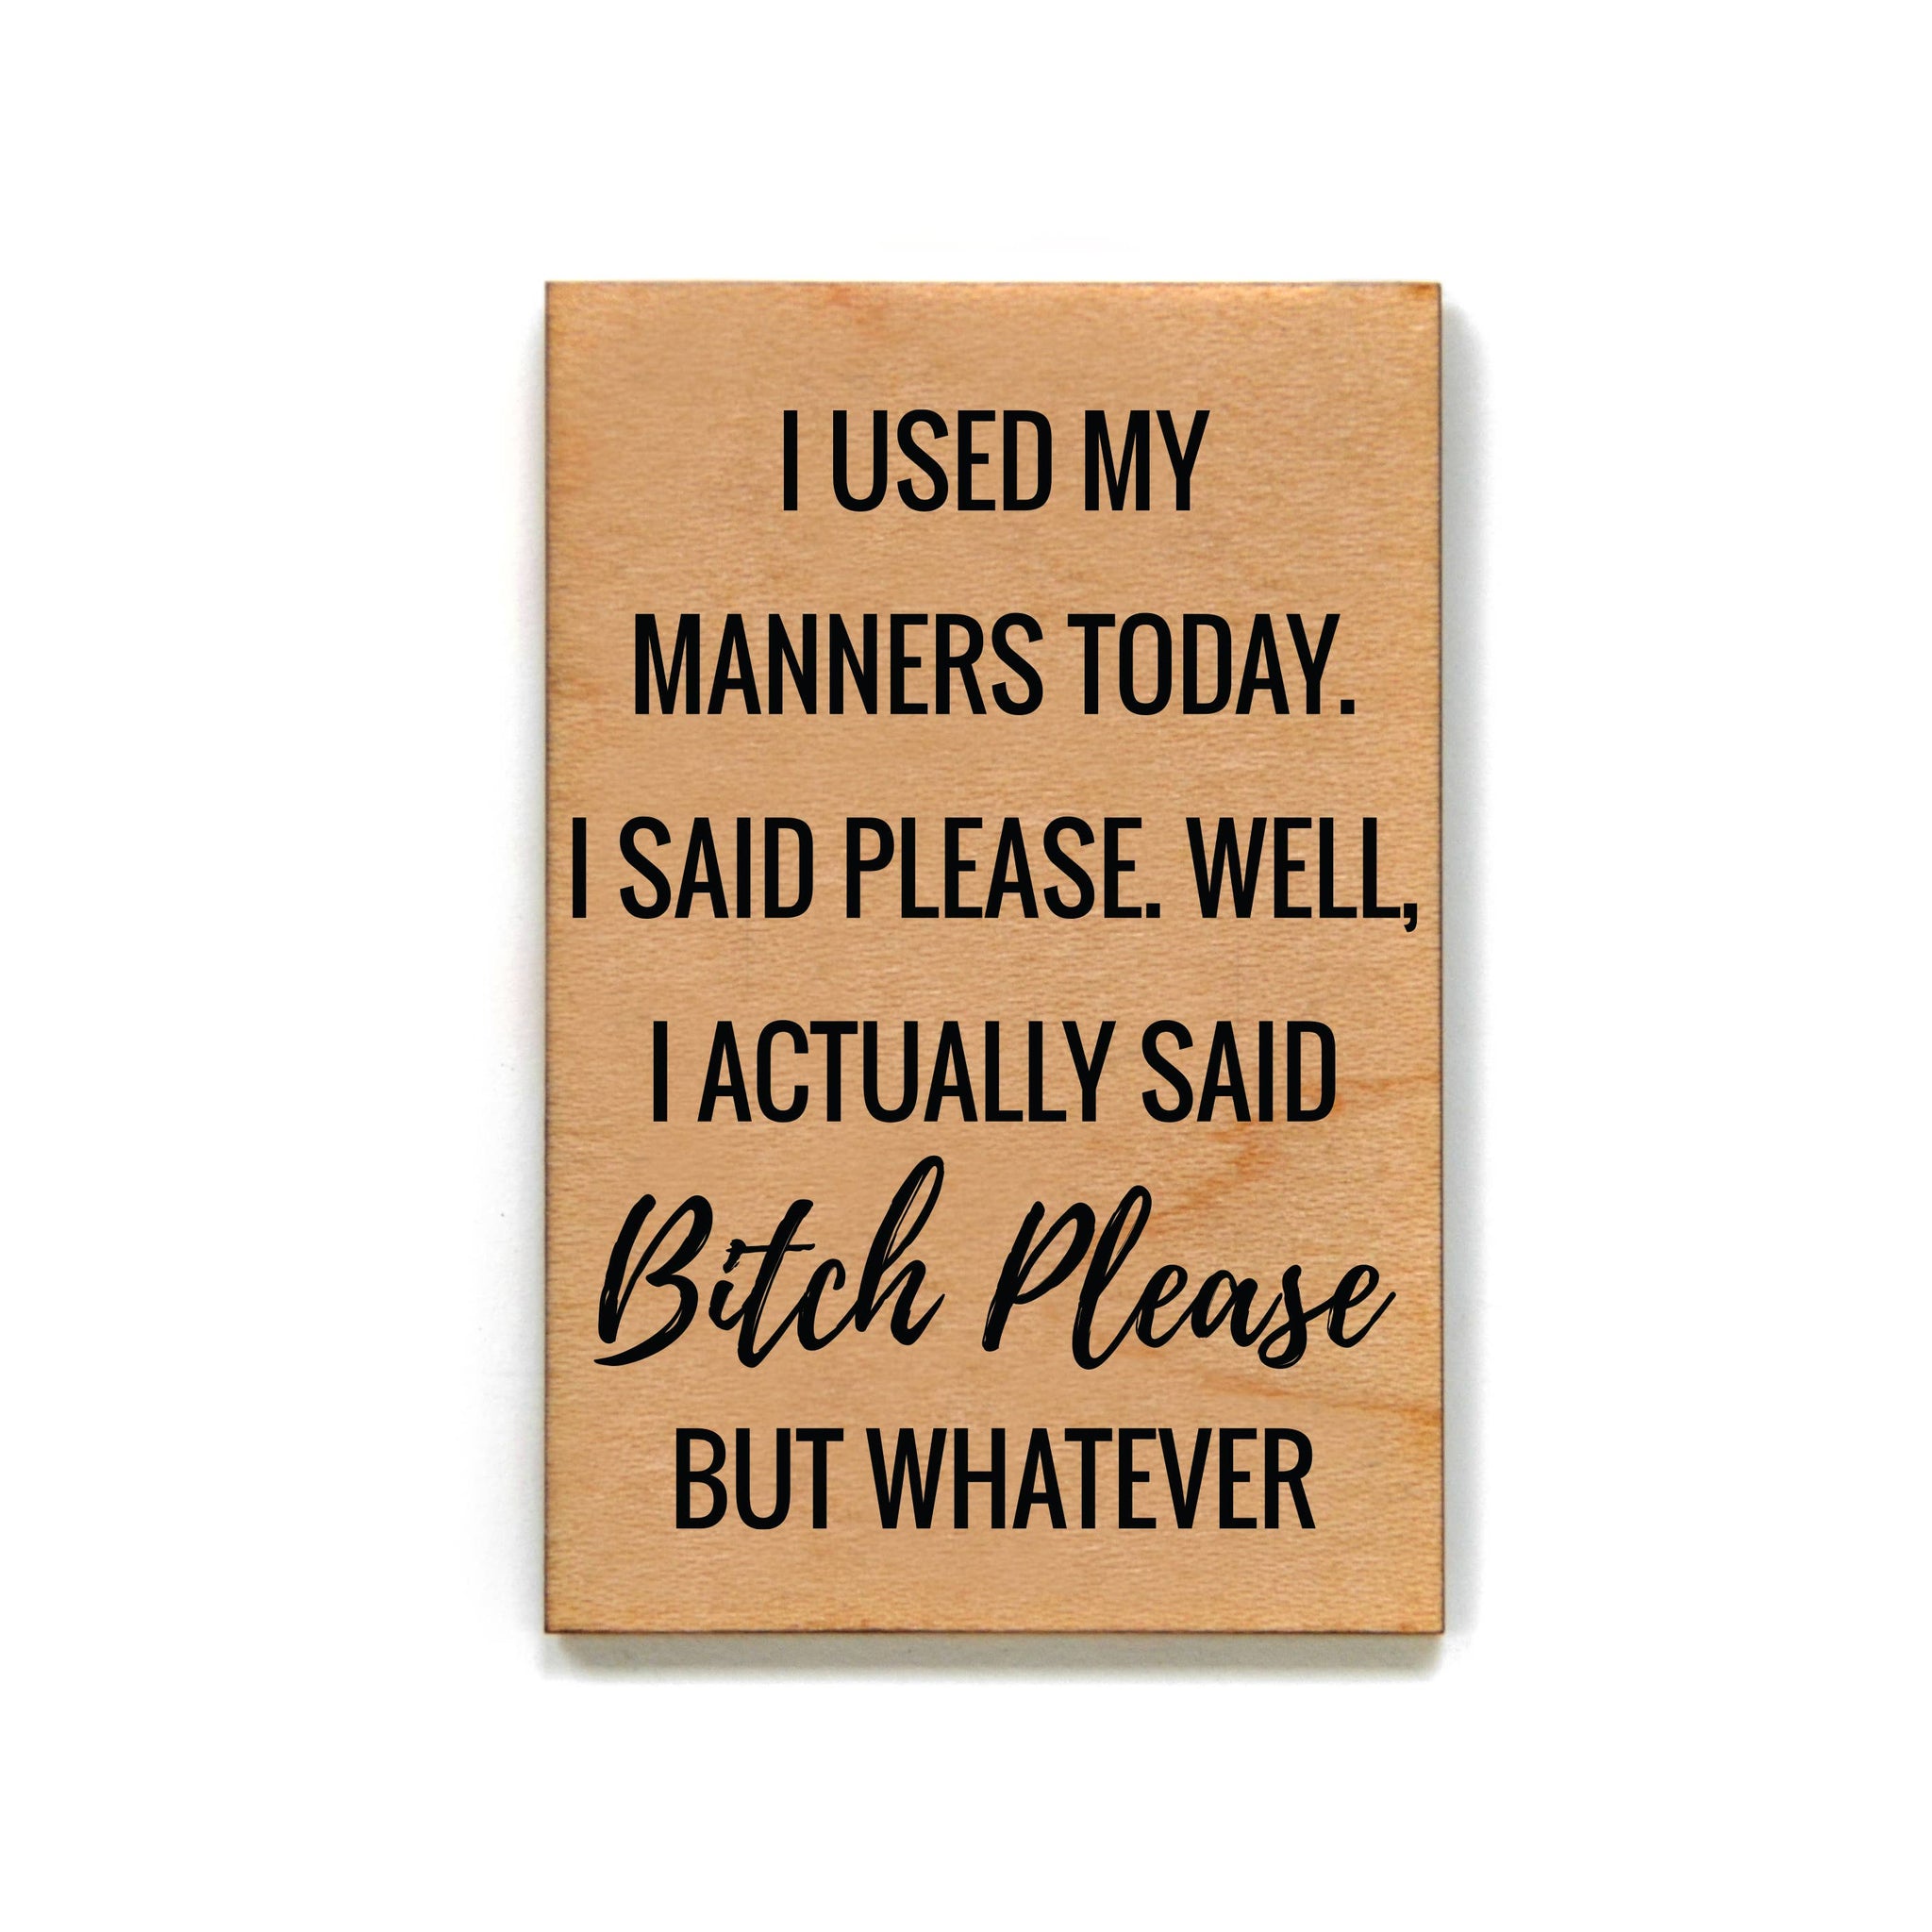 Driftless Studios - Funny Magnet - I Used My Manners Today